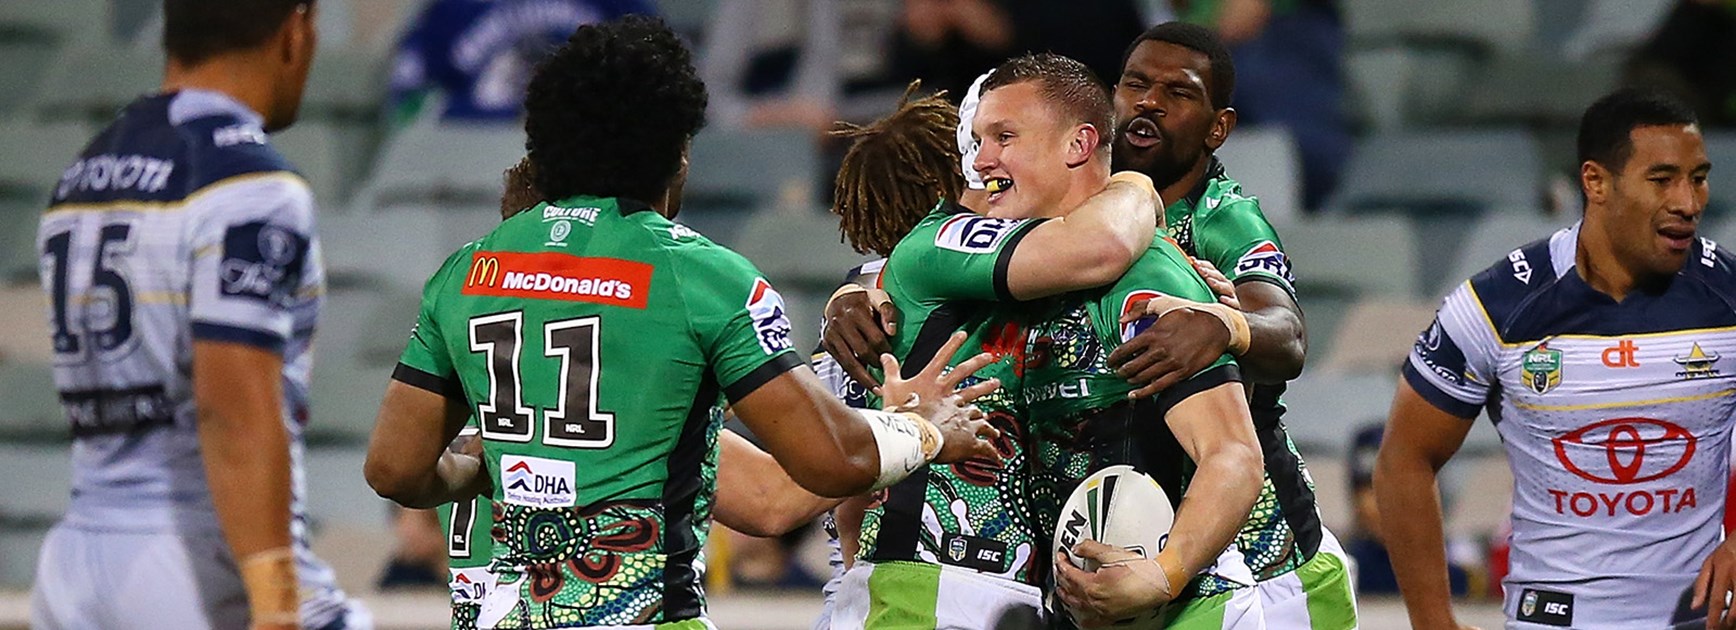 Canberra celebrate after scoring another try against the Cowboys in Round 18.